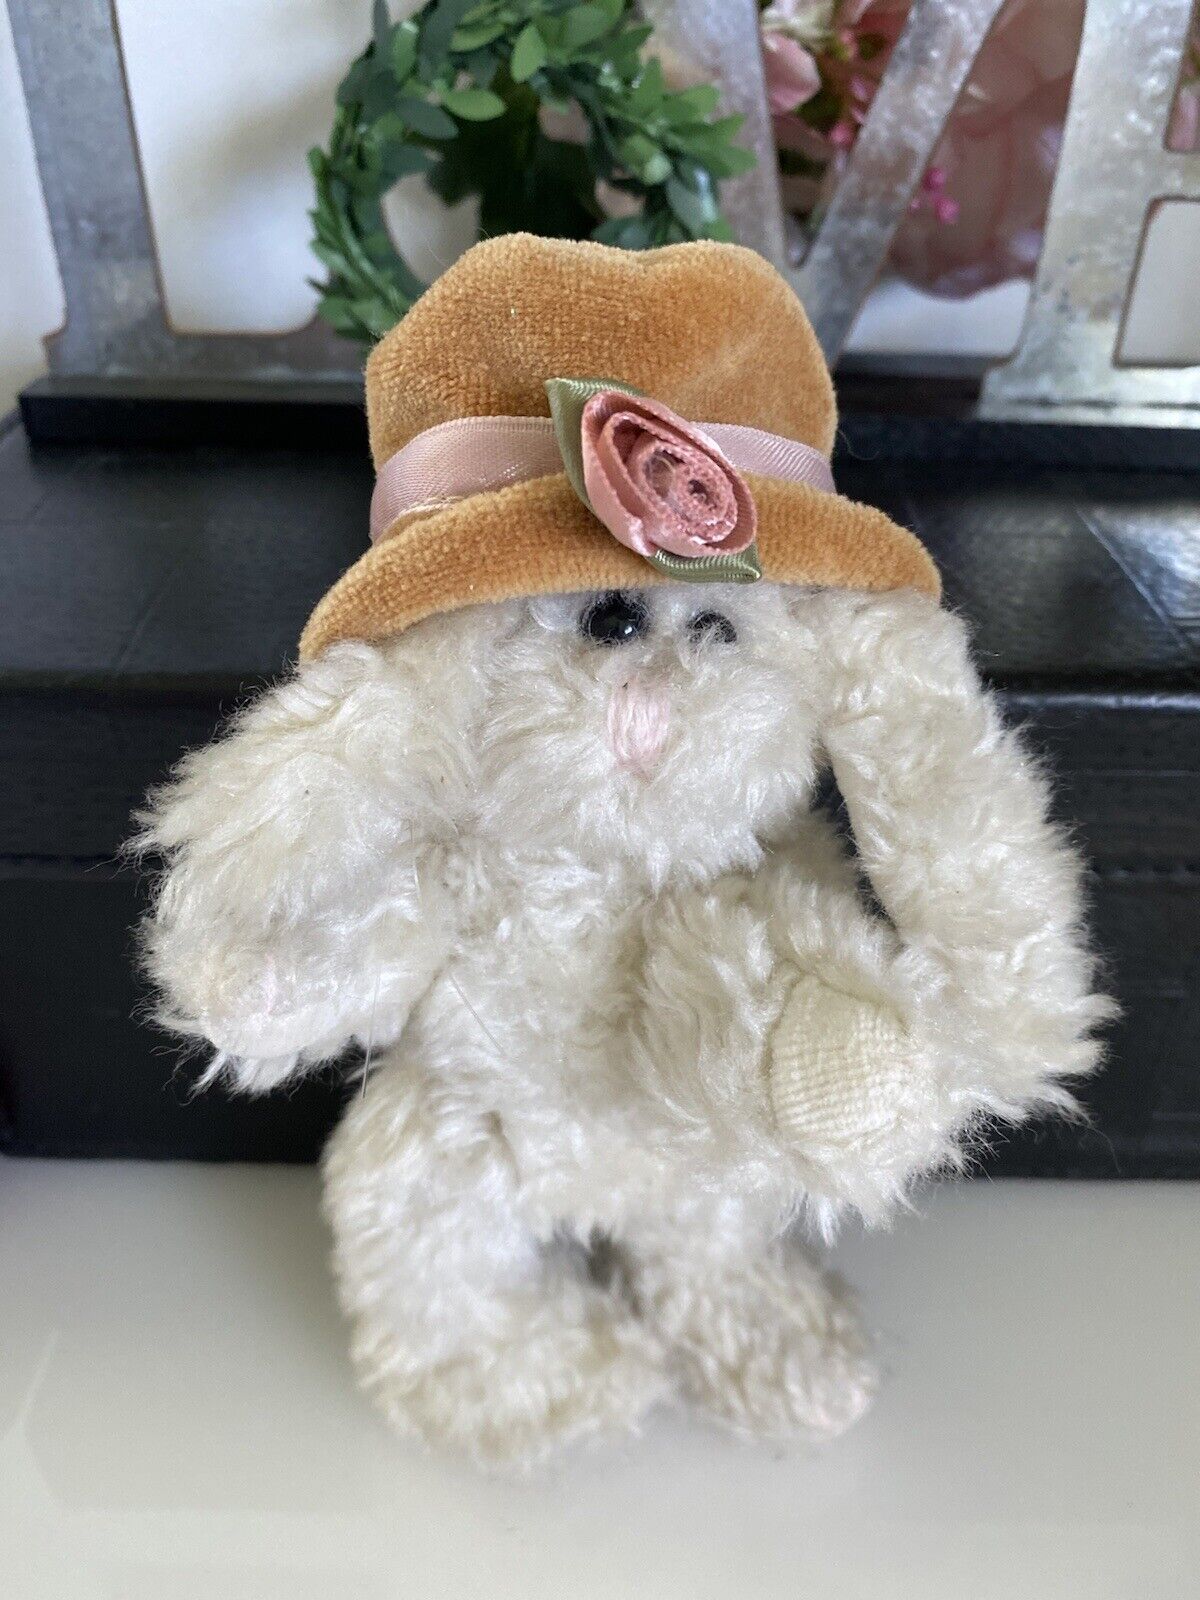 Retired Boyds Collectibles Bunny Rabbit Mimi Delapain #1364 Vintage 1990-94 Hat